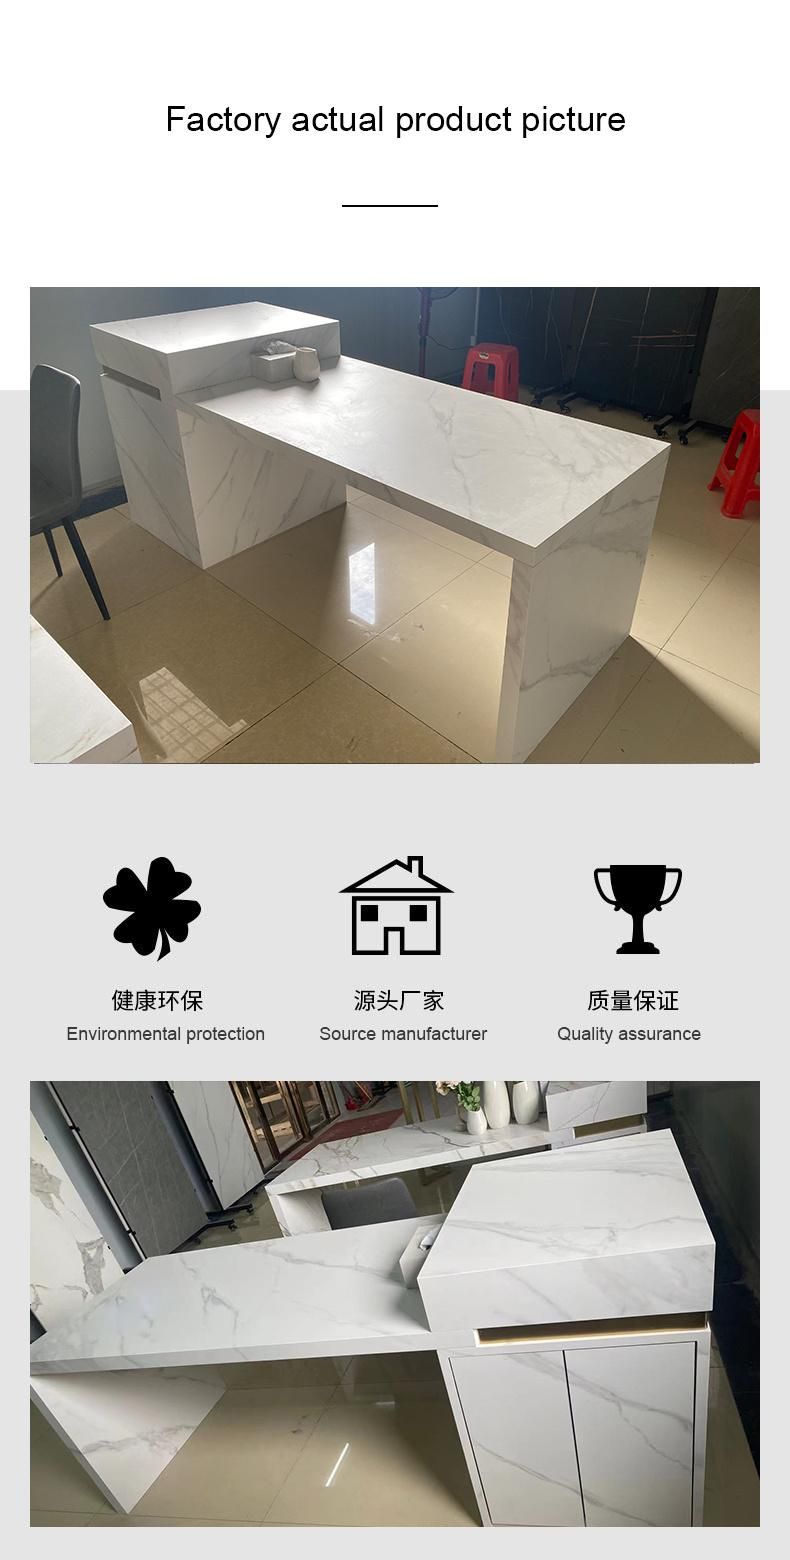 Modern Furniture Marble Rock Plate Dining Table Gold-Decorated Kitchen Cabinet